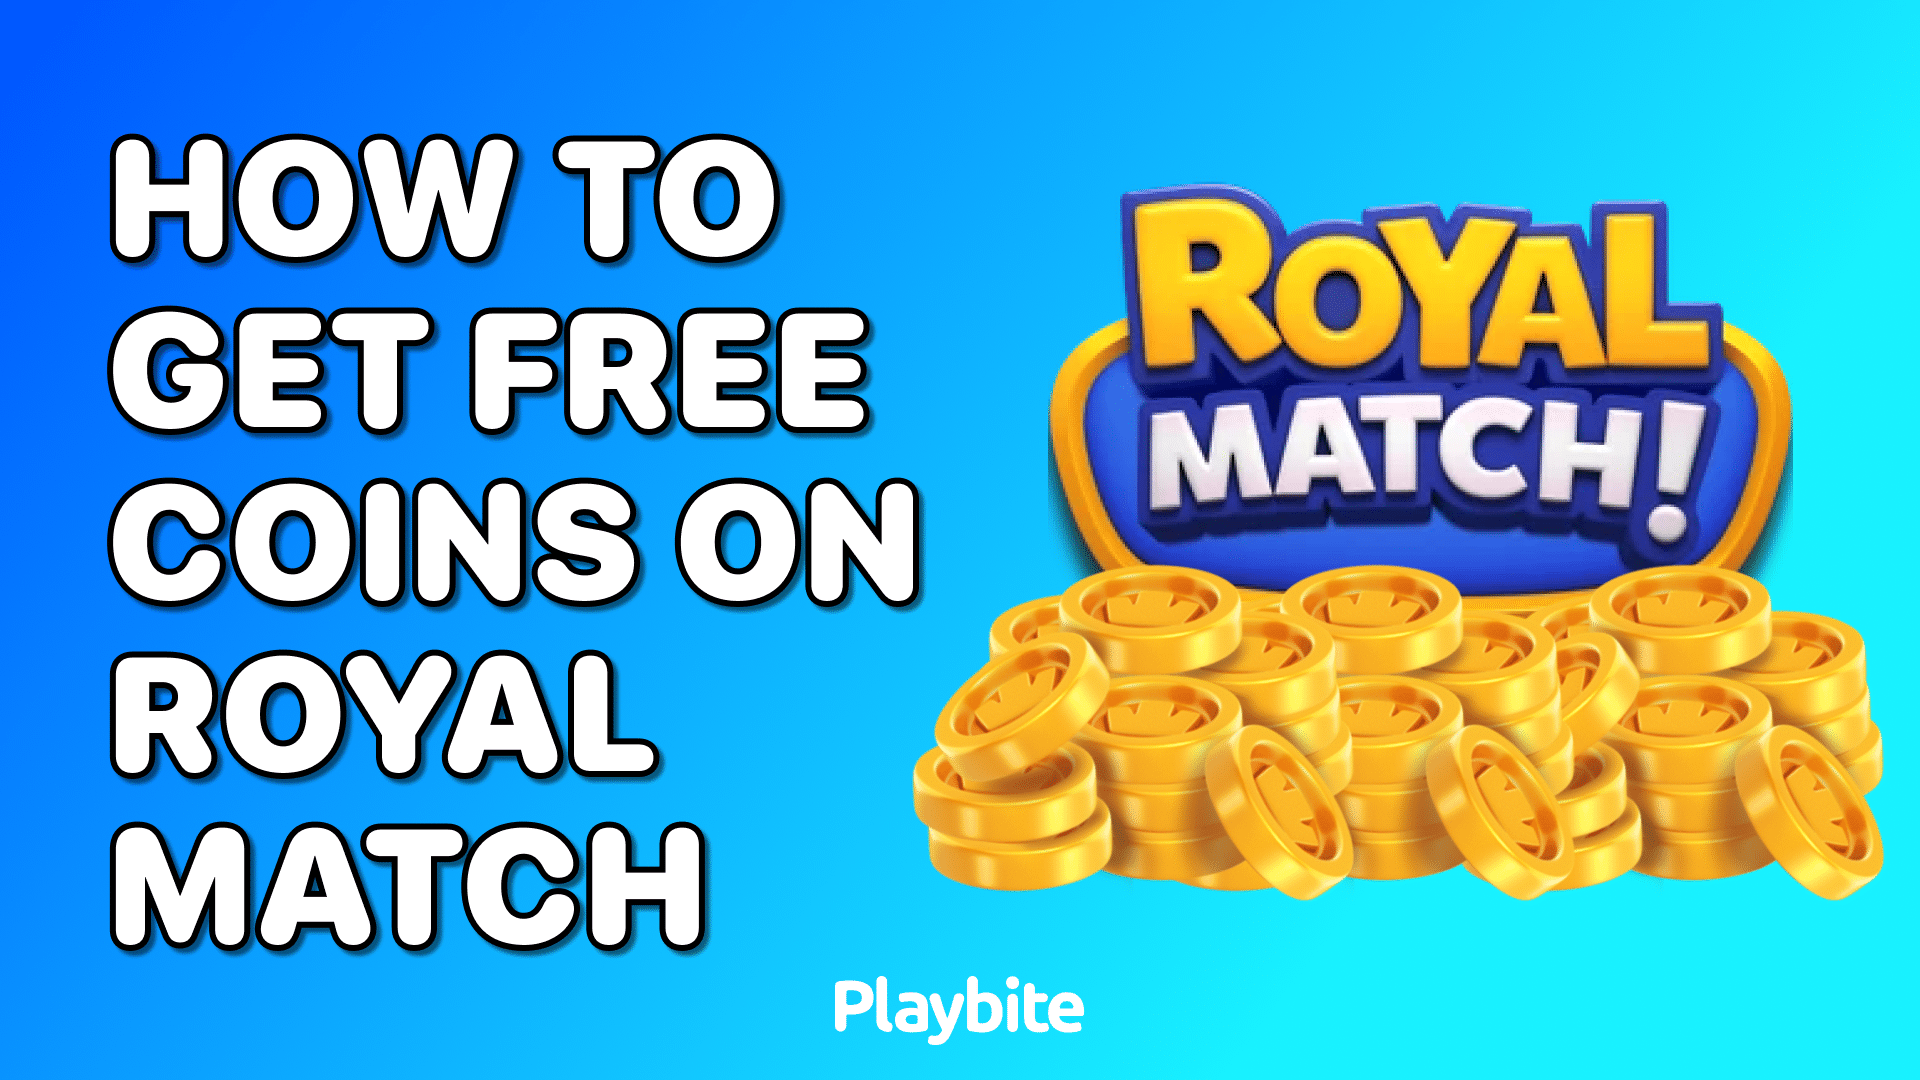 How To Get Free Coins On Royal Match